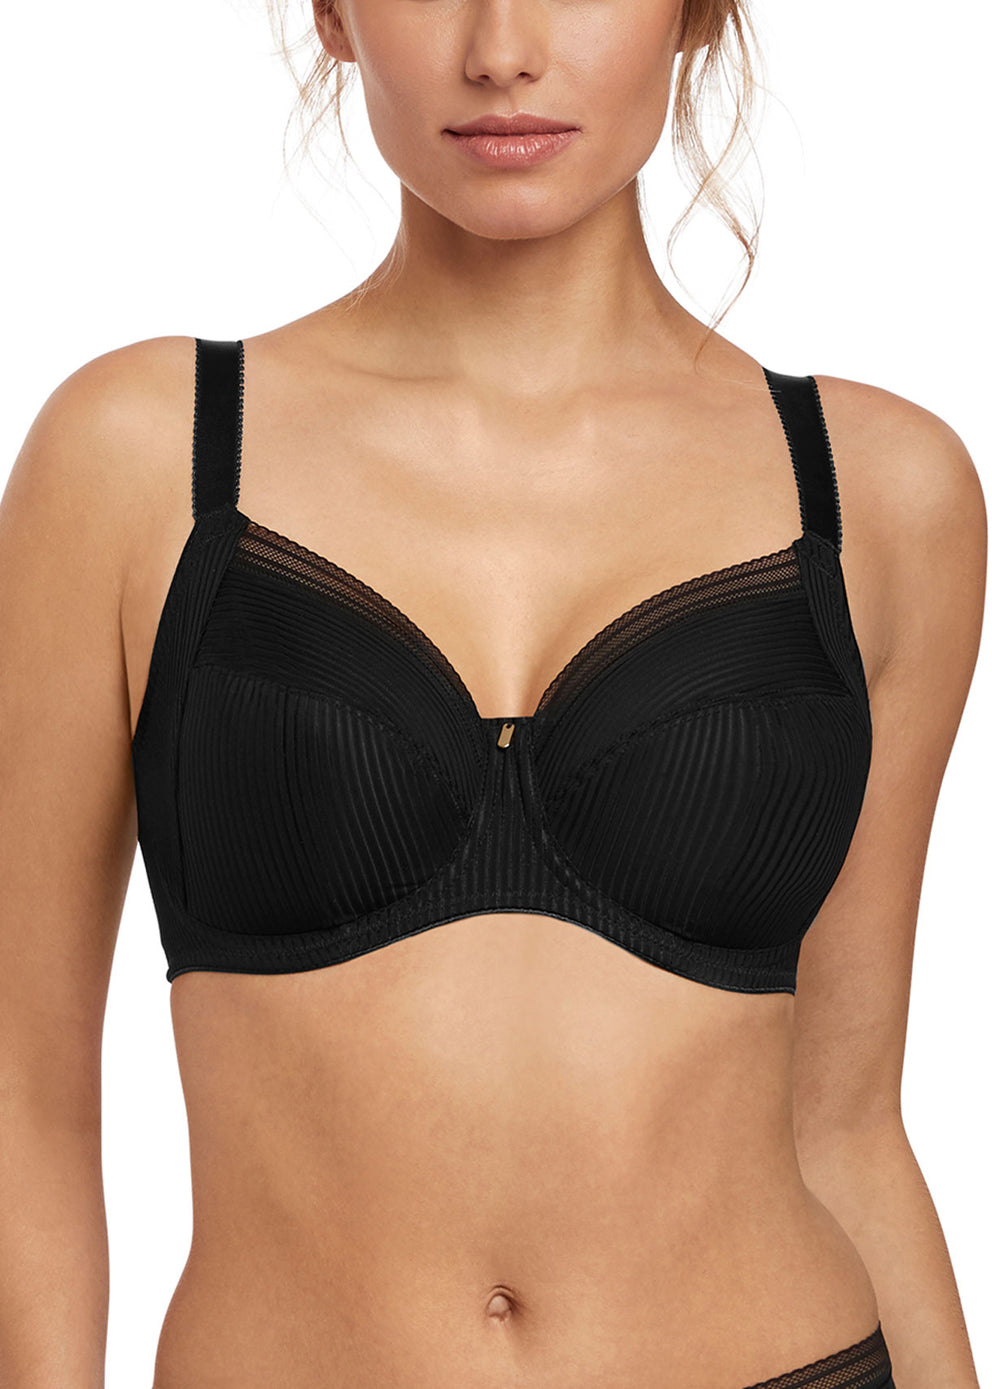 Fusion Full Cup Side Support Bra - Black